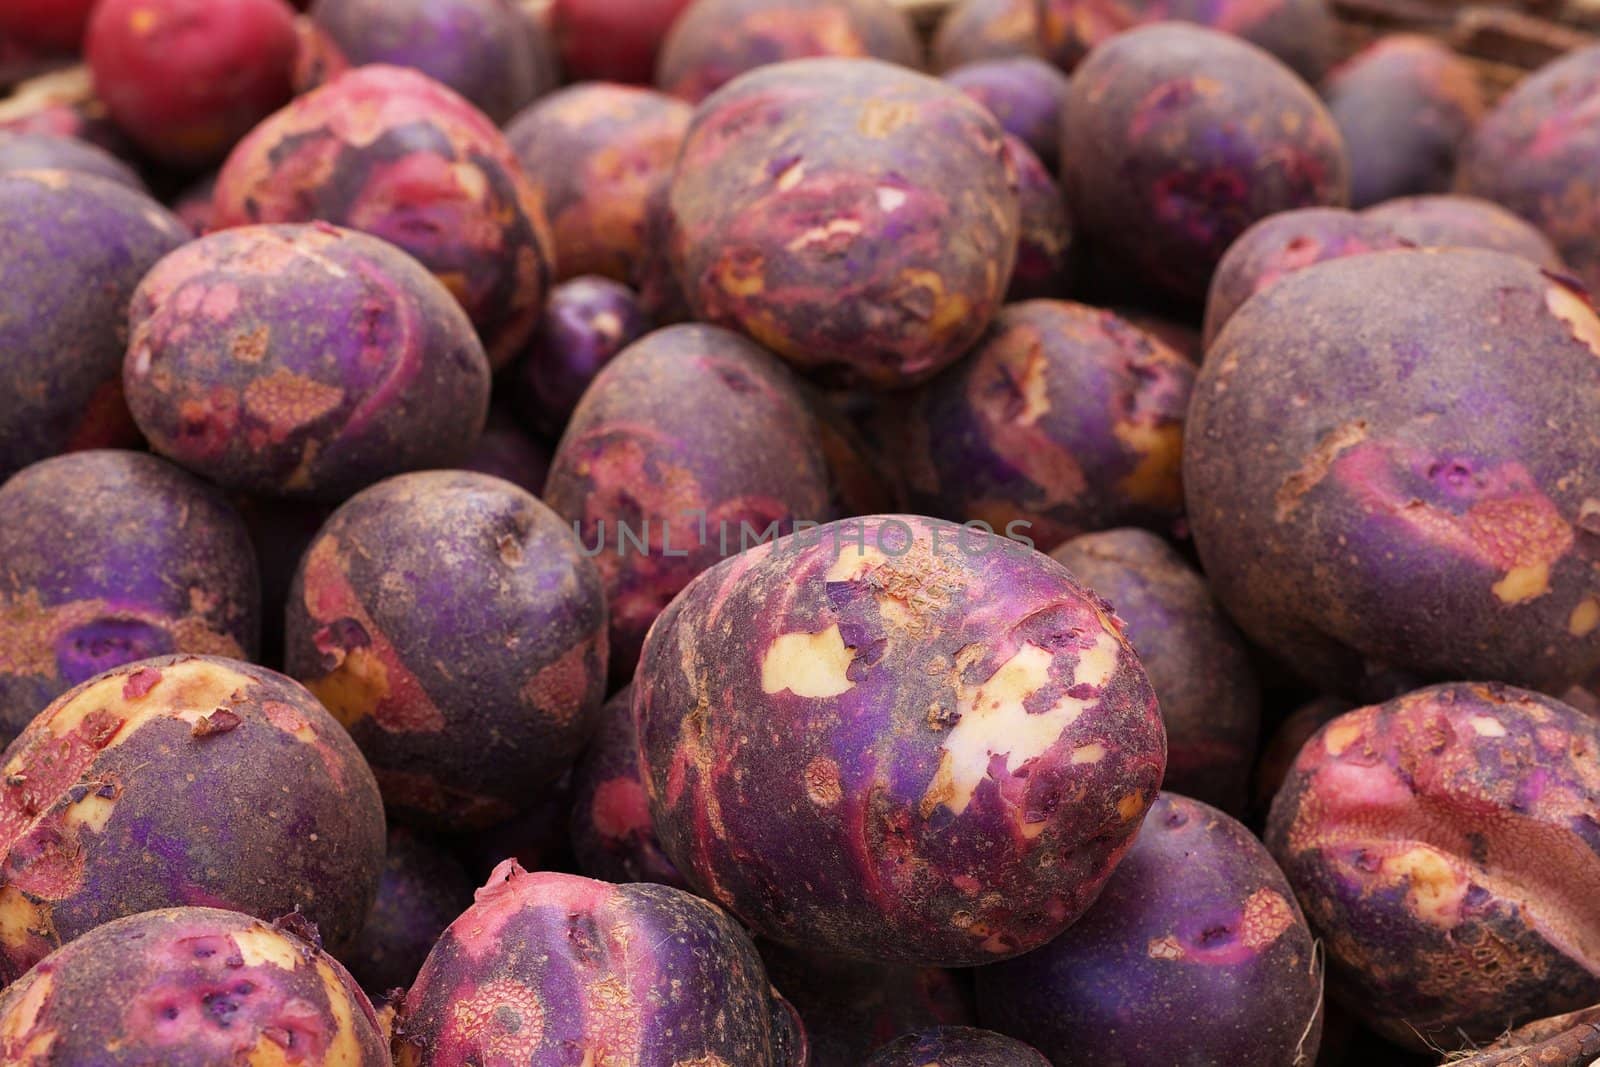 Pile of Purple Potatoes at the farmers market